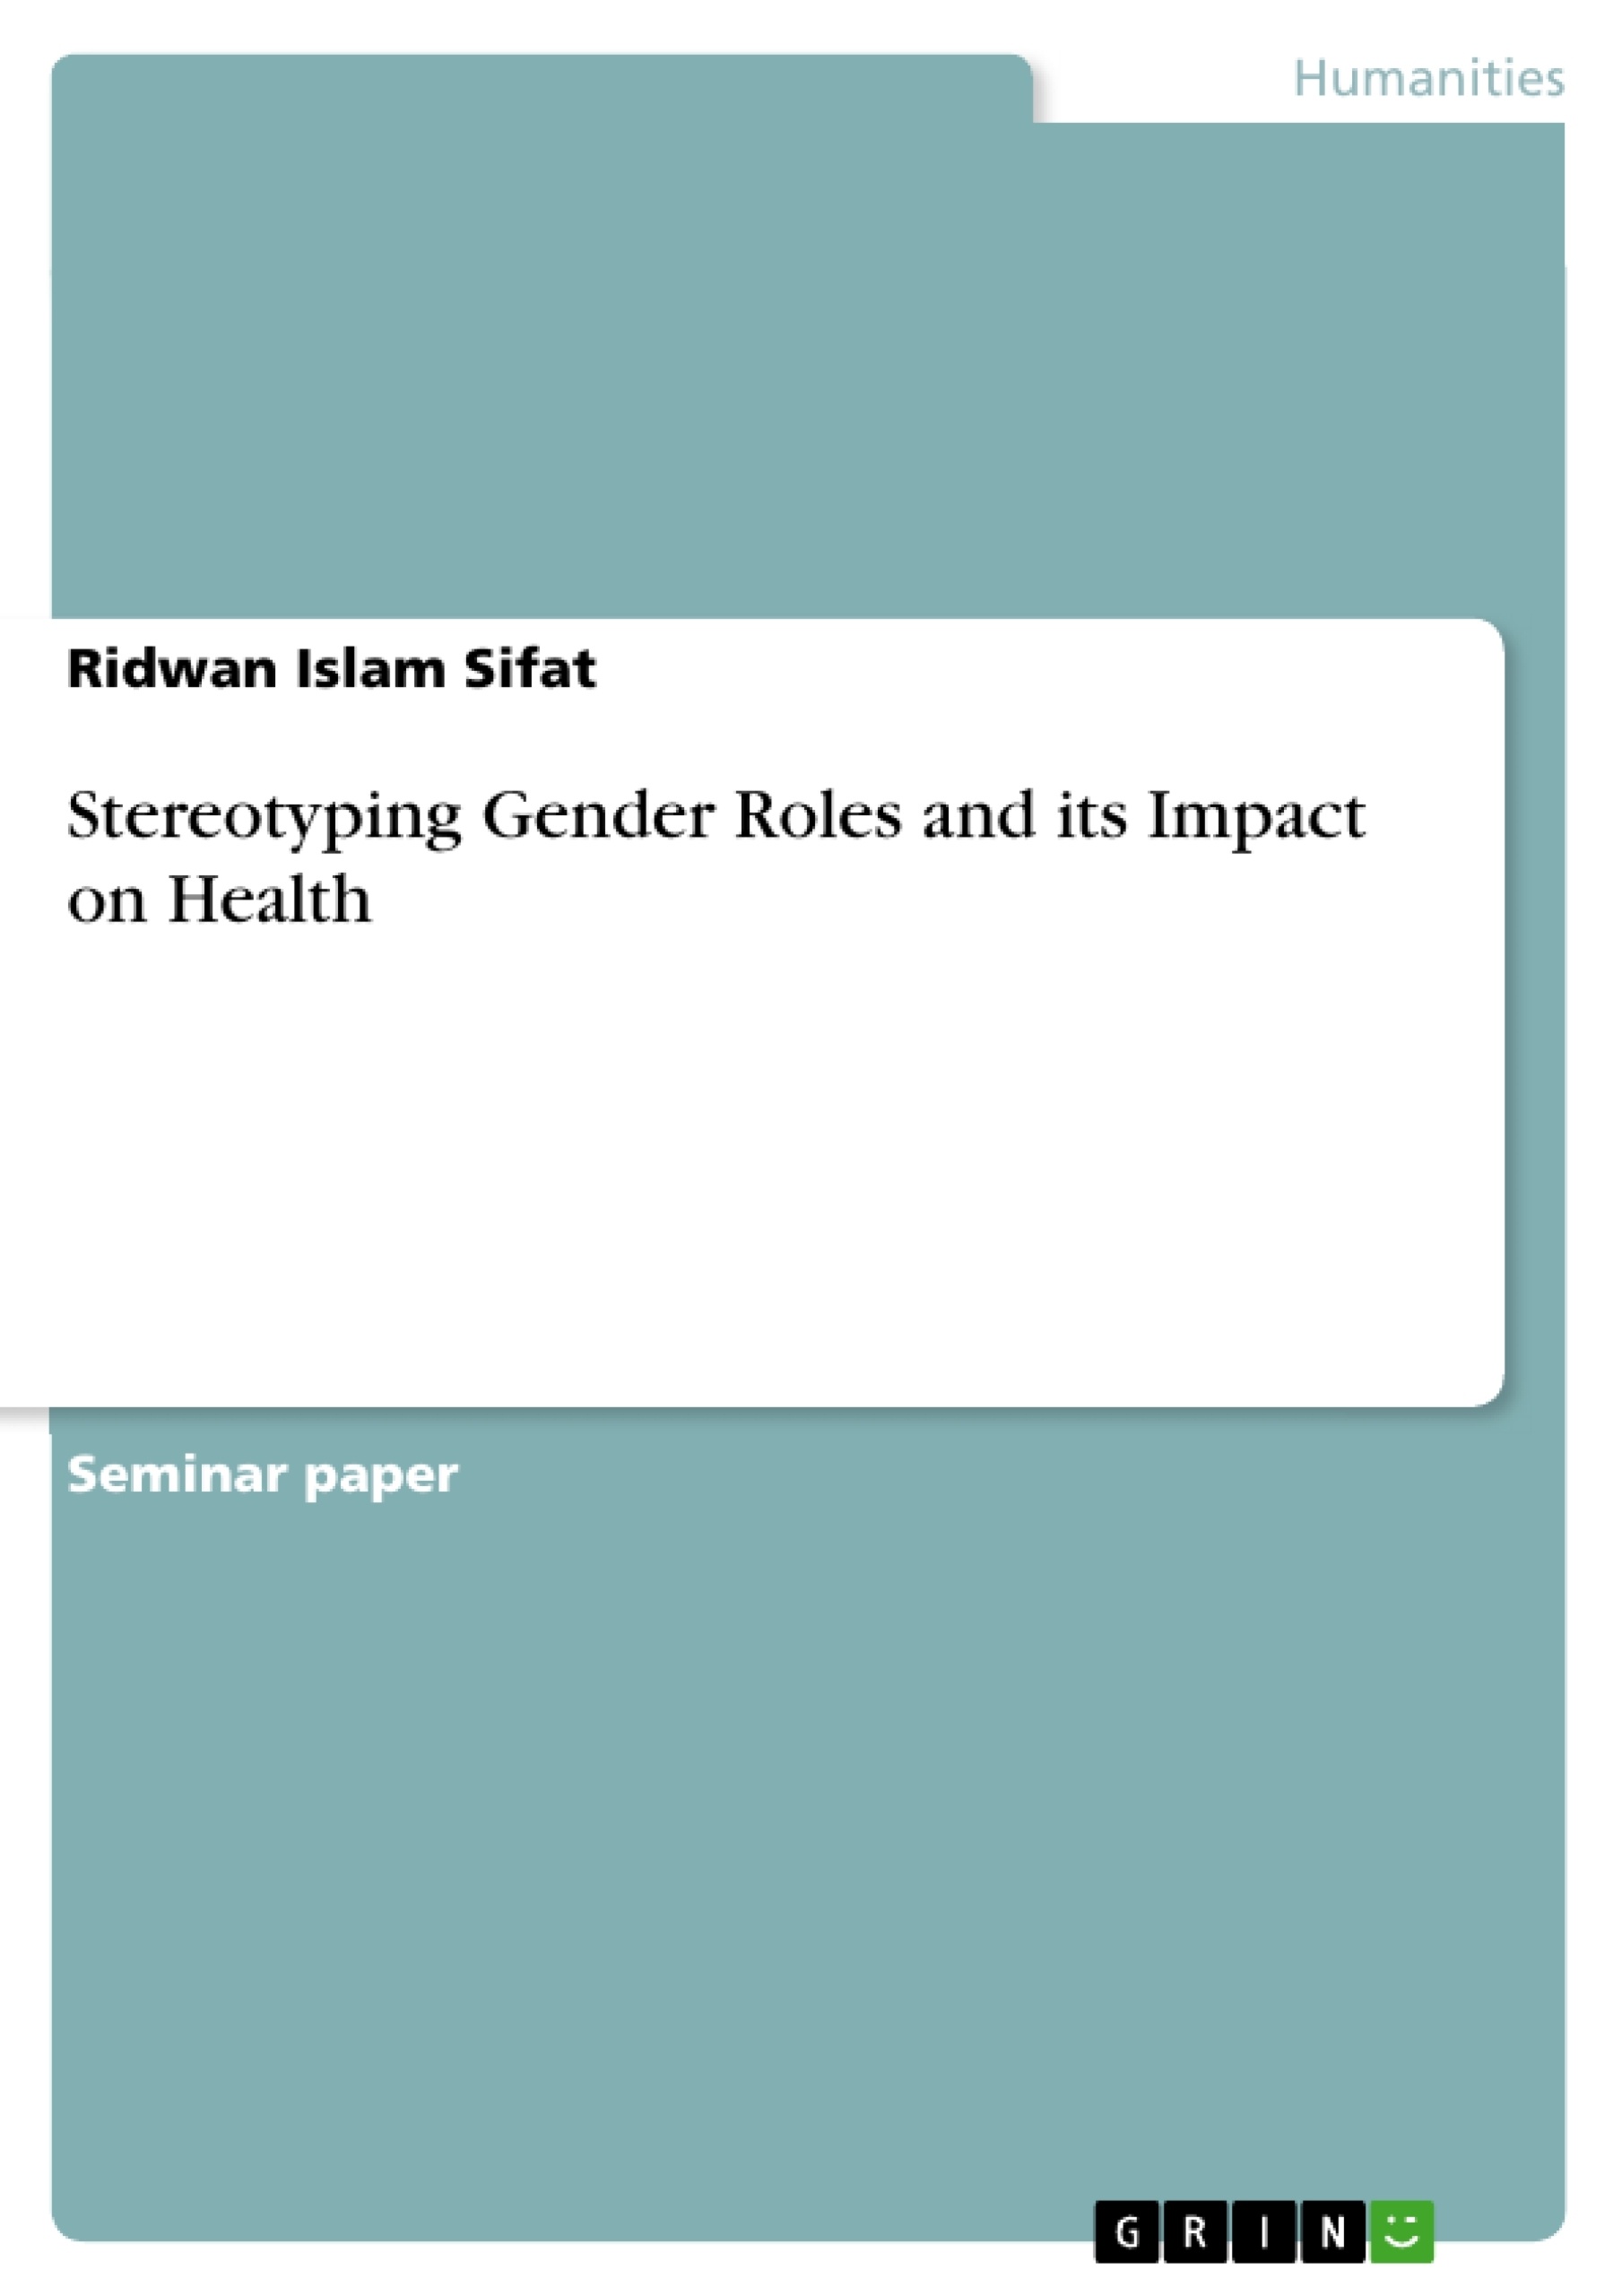 Title: Stereotyping Gender Roles and its Impact on Health